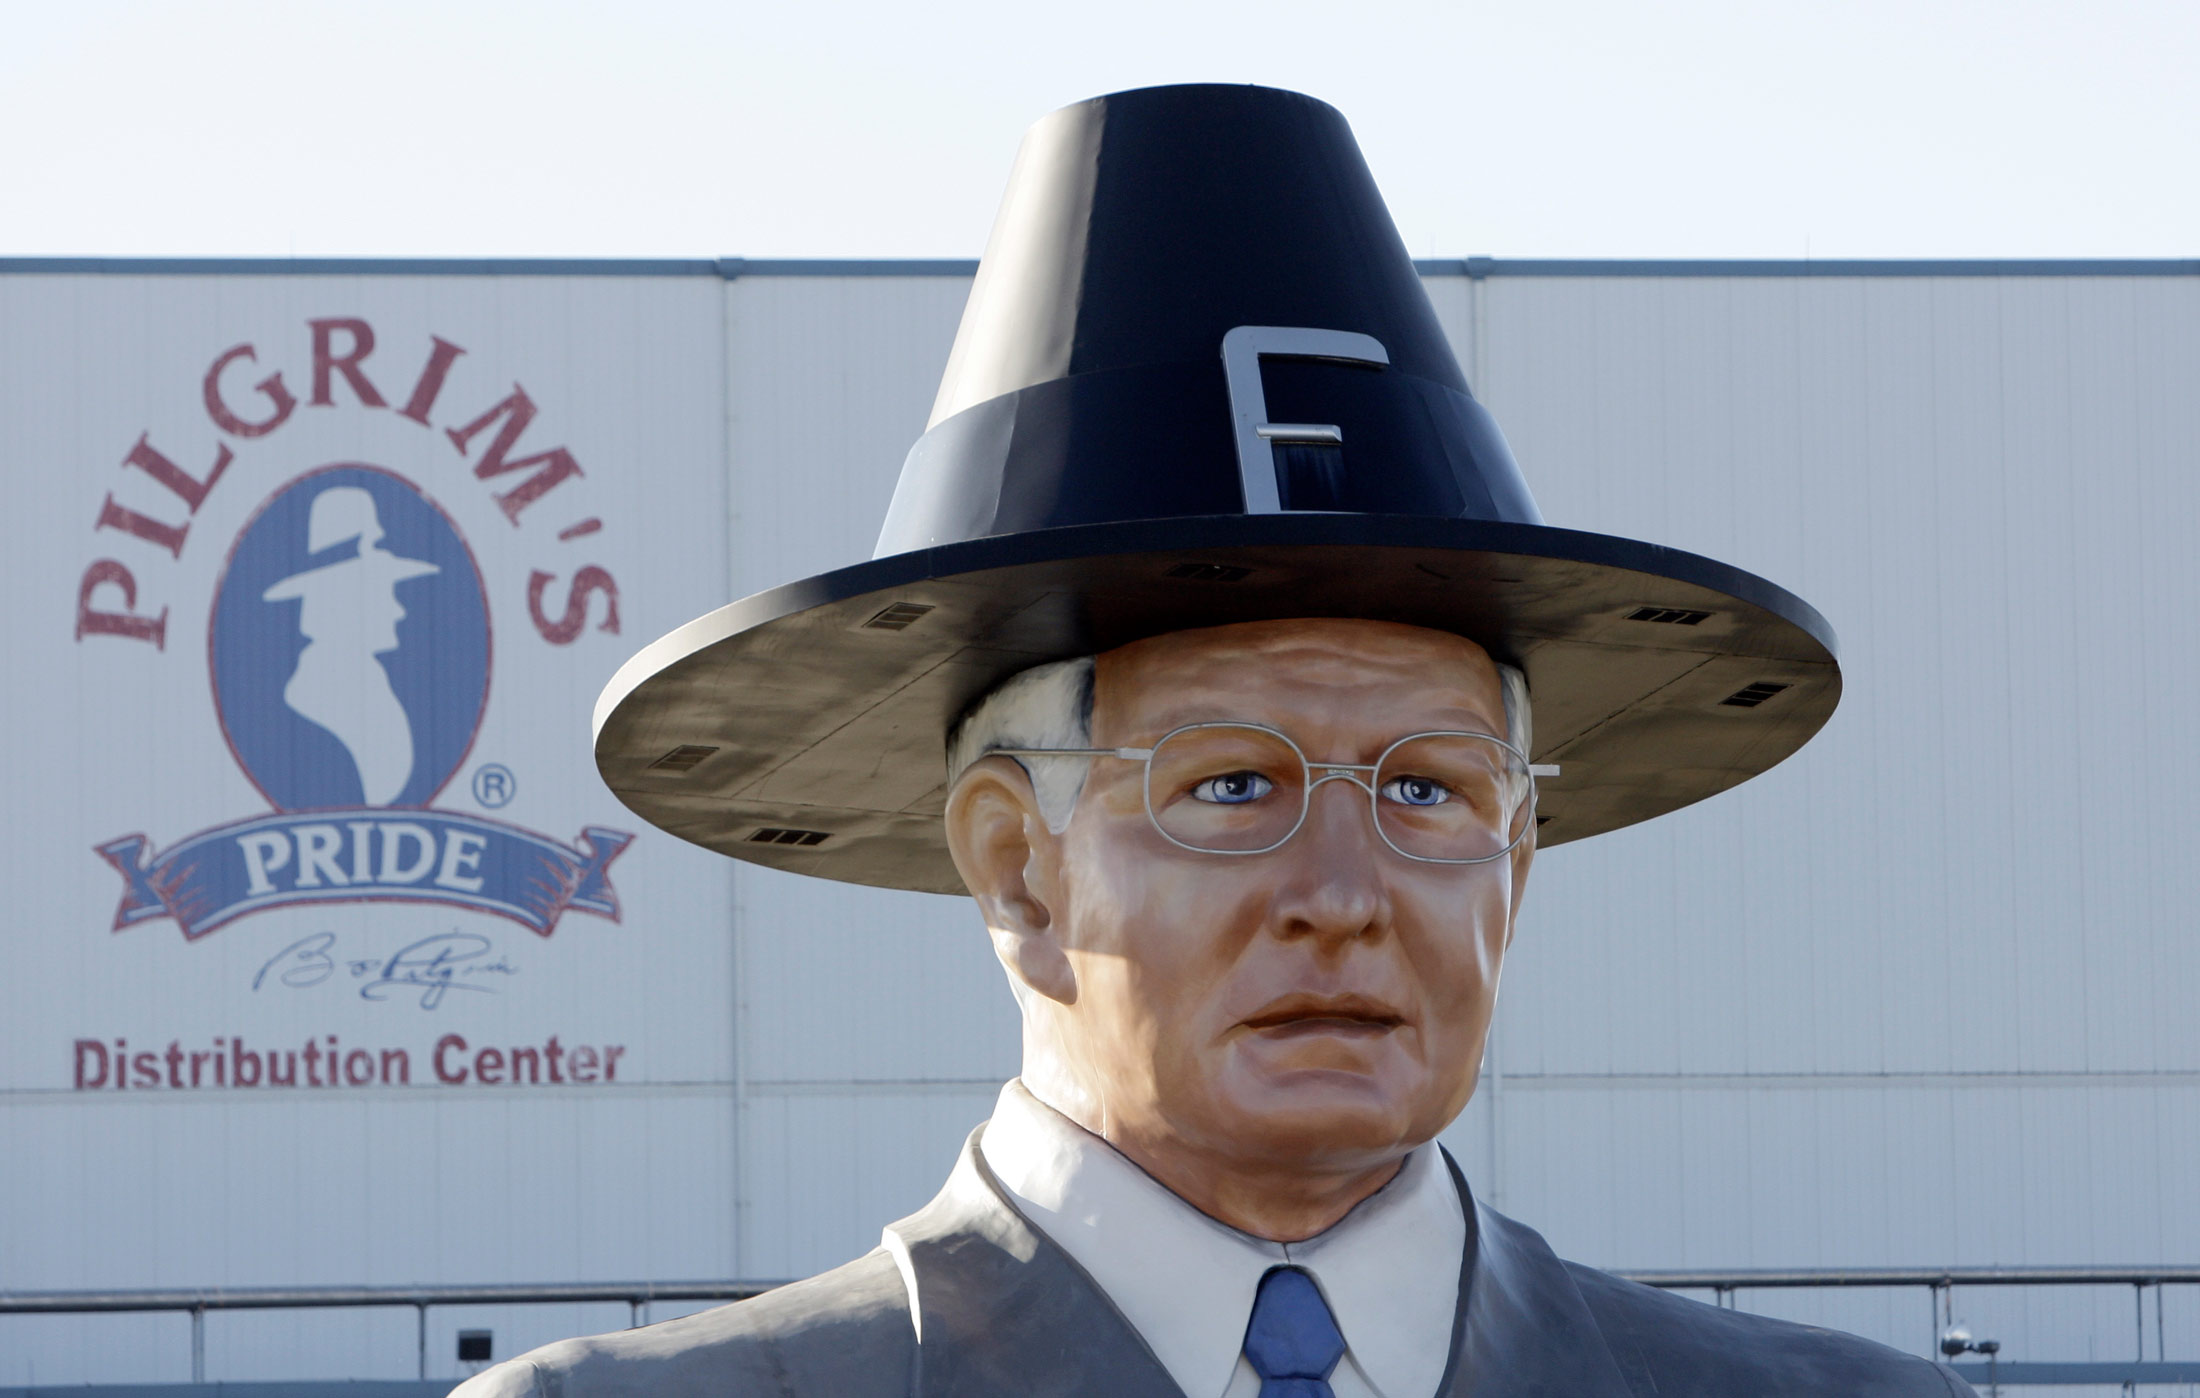 A statue of Pilgrim's Pride founder Bo Pilgrim is displayed outside distribution center near Pittsburg, Texas.
